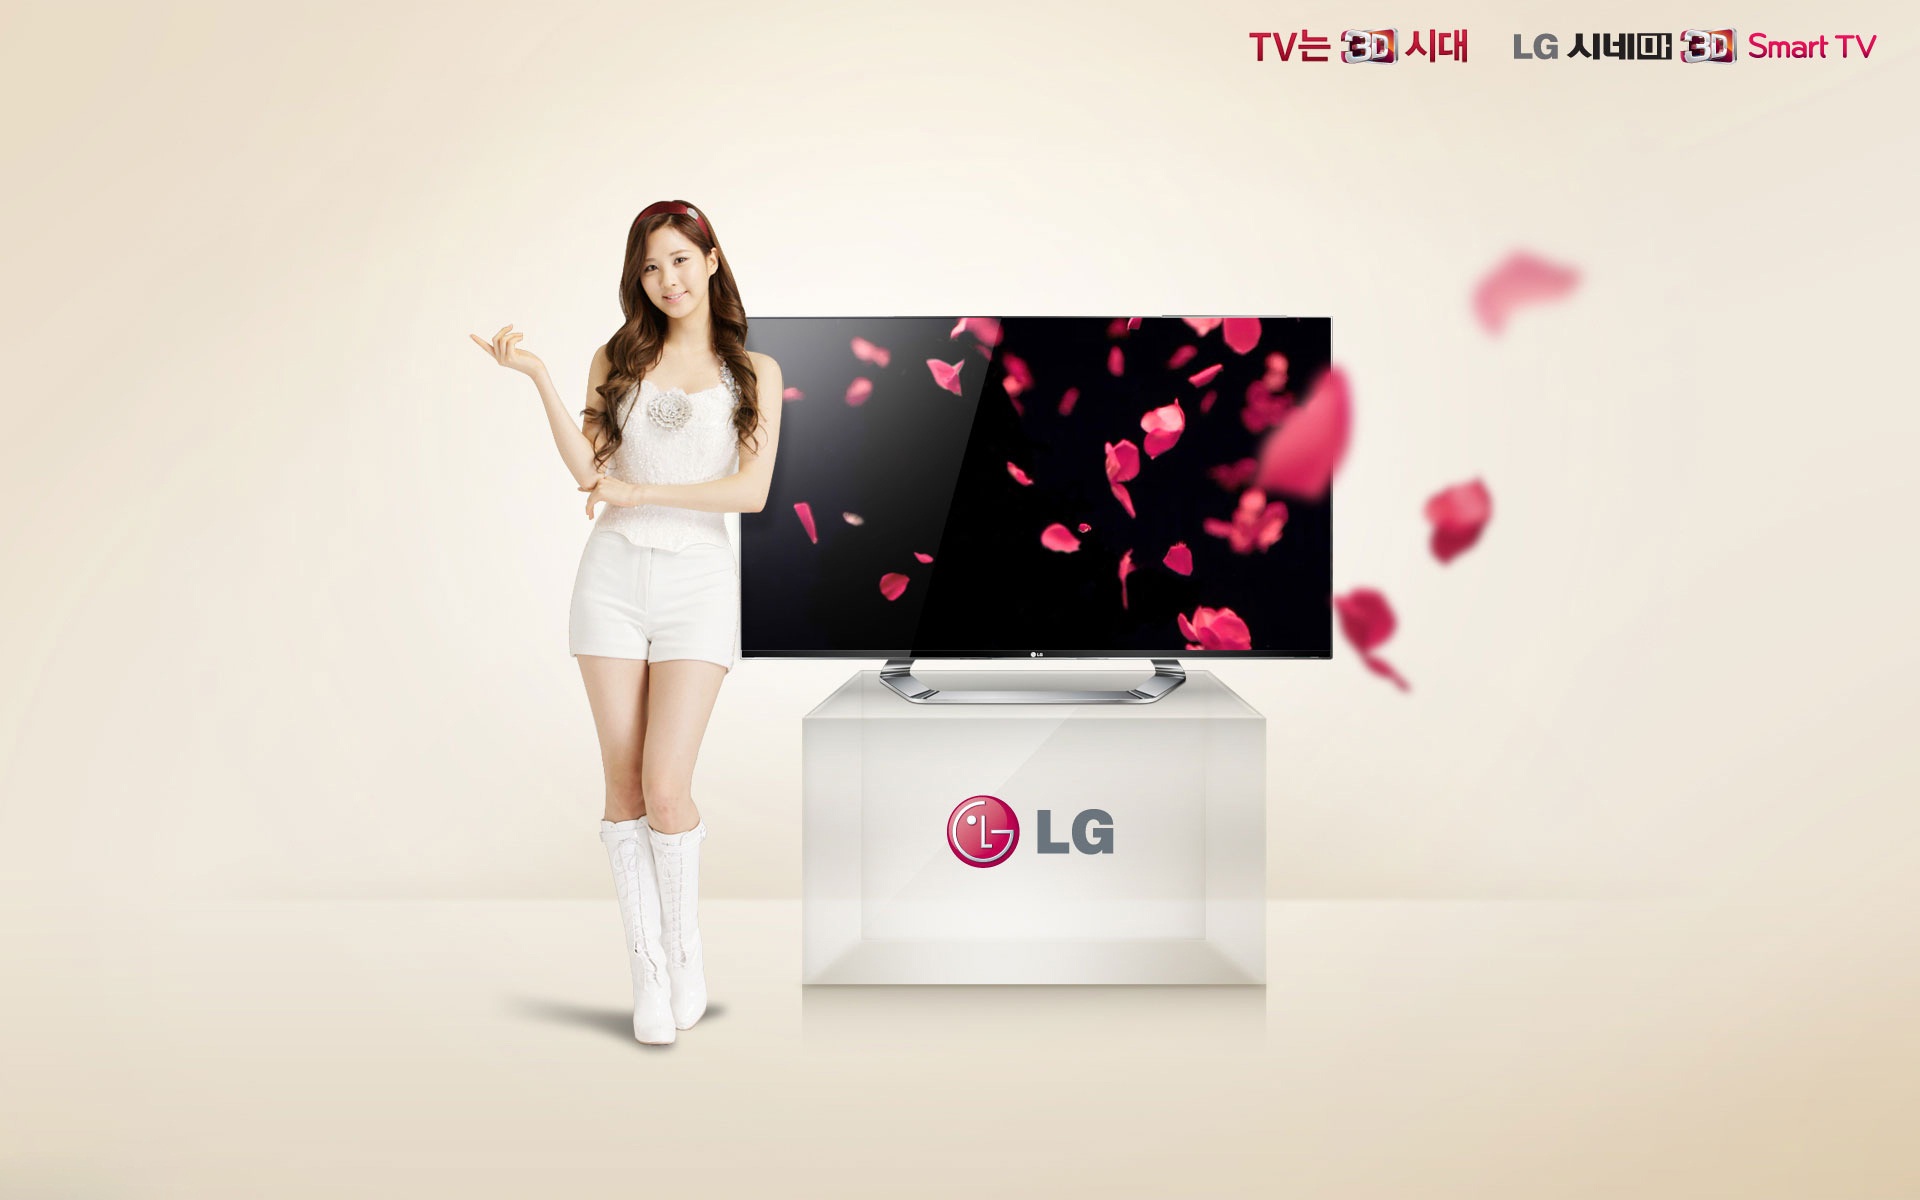 Girls Generation ACE and LG endorsements ads HD wallpapers #16 - 1920x1200